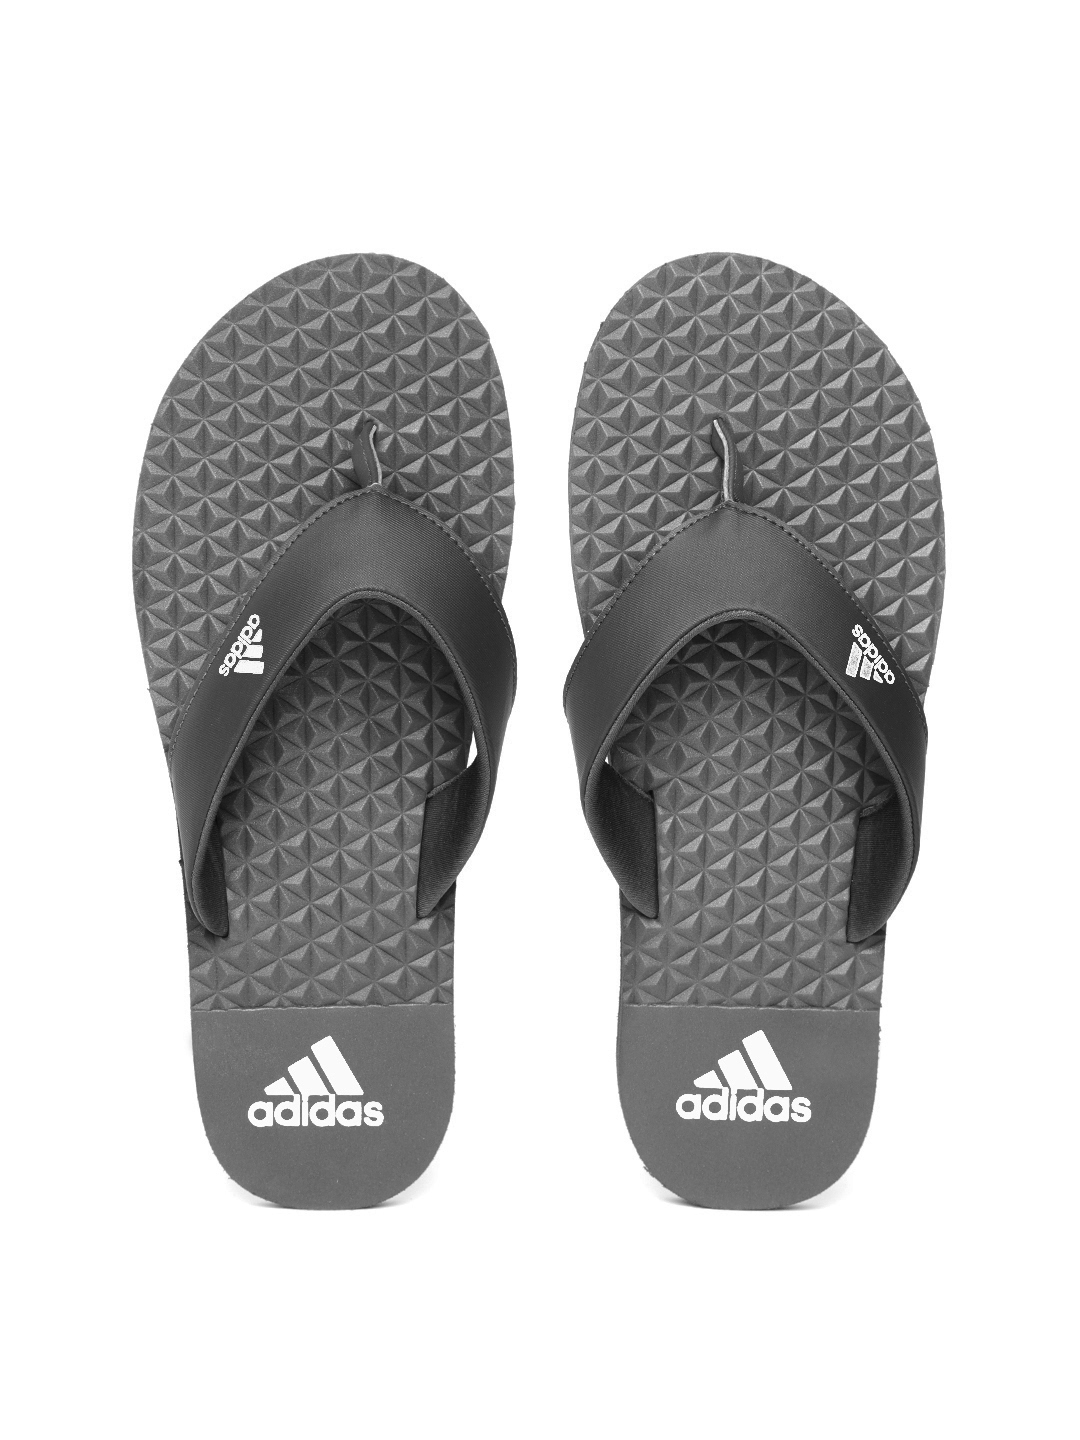 adidas bise slippers